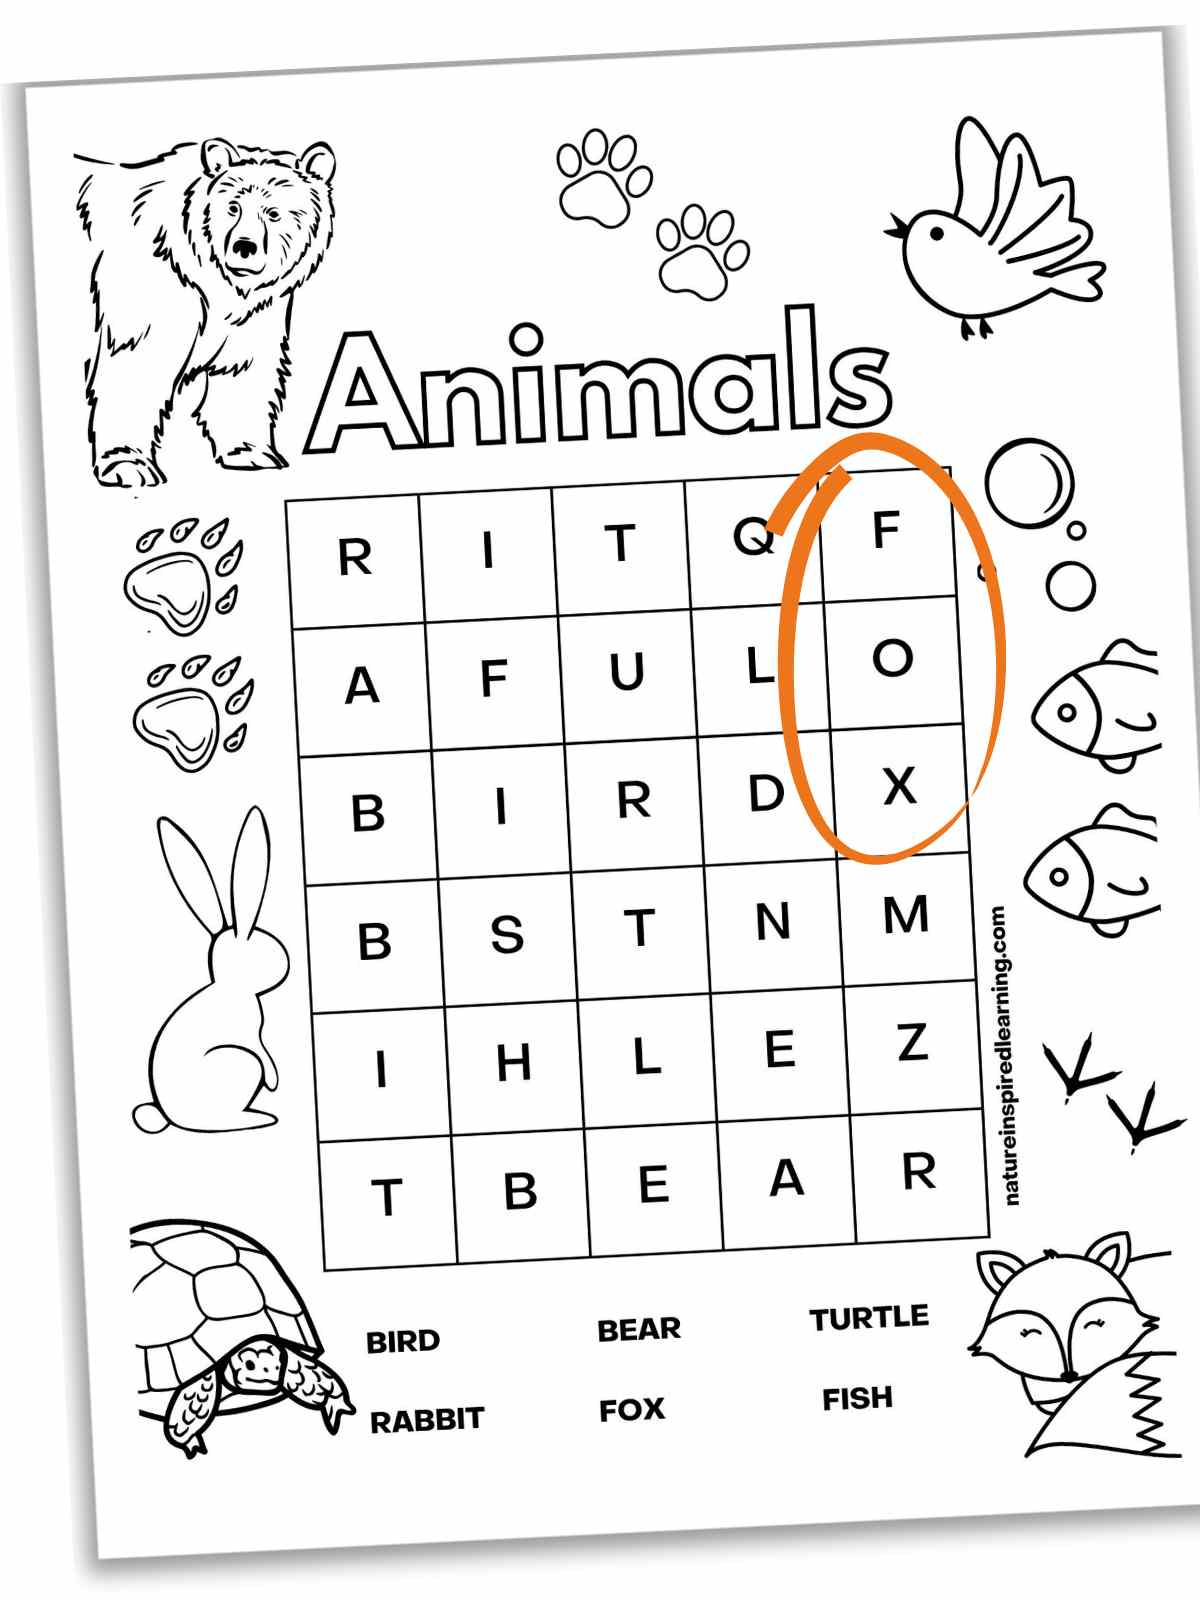 black and white word search with simple animal words and animals around the border. Fox circled in orange.